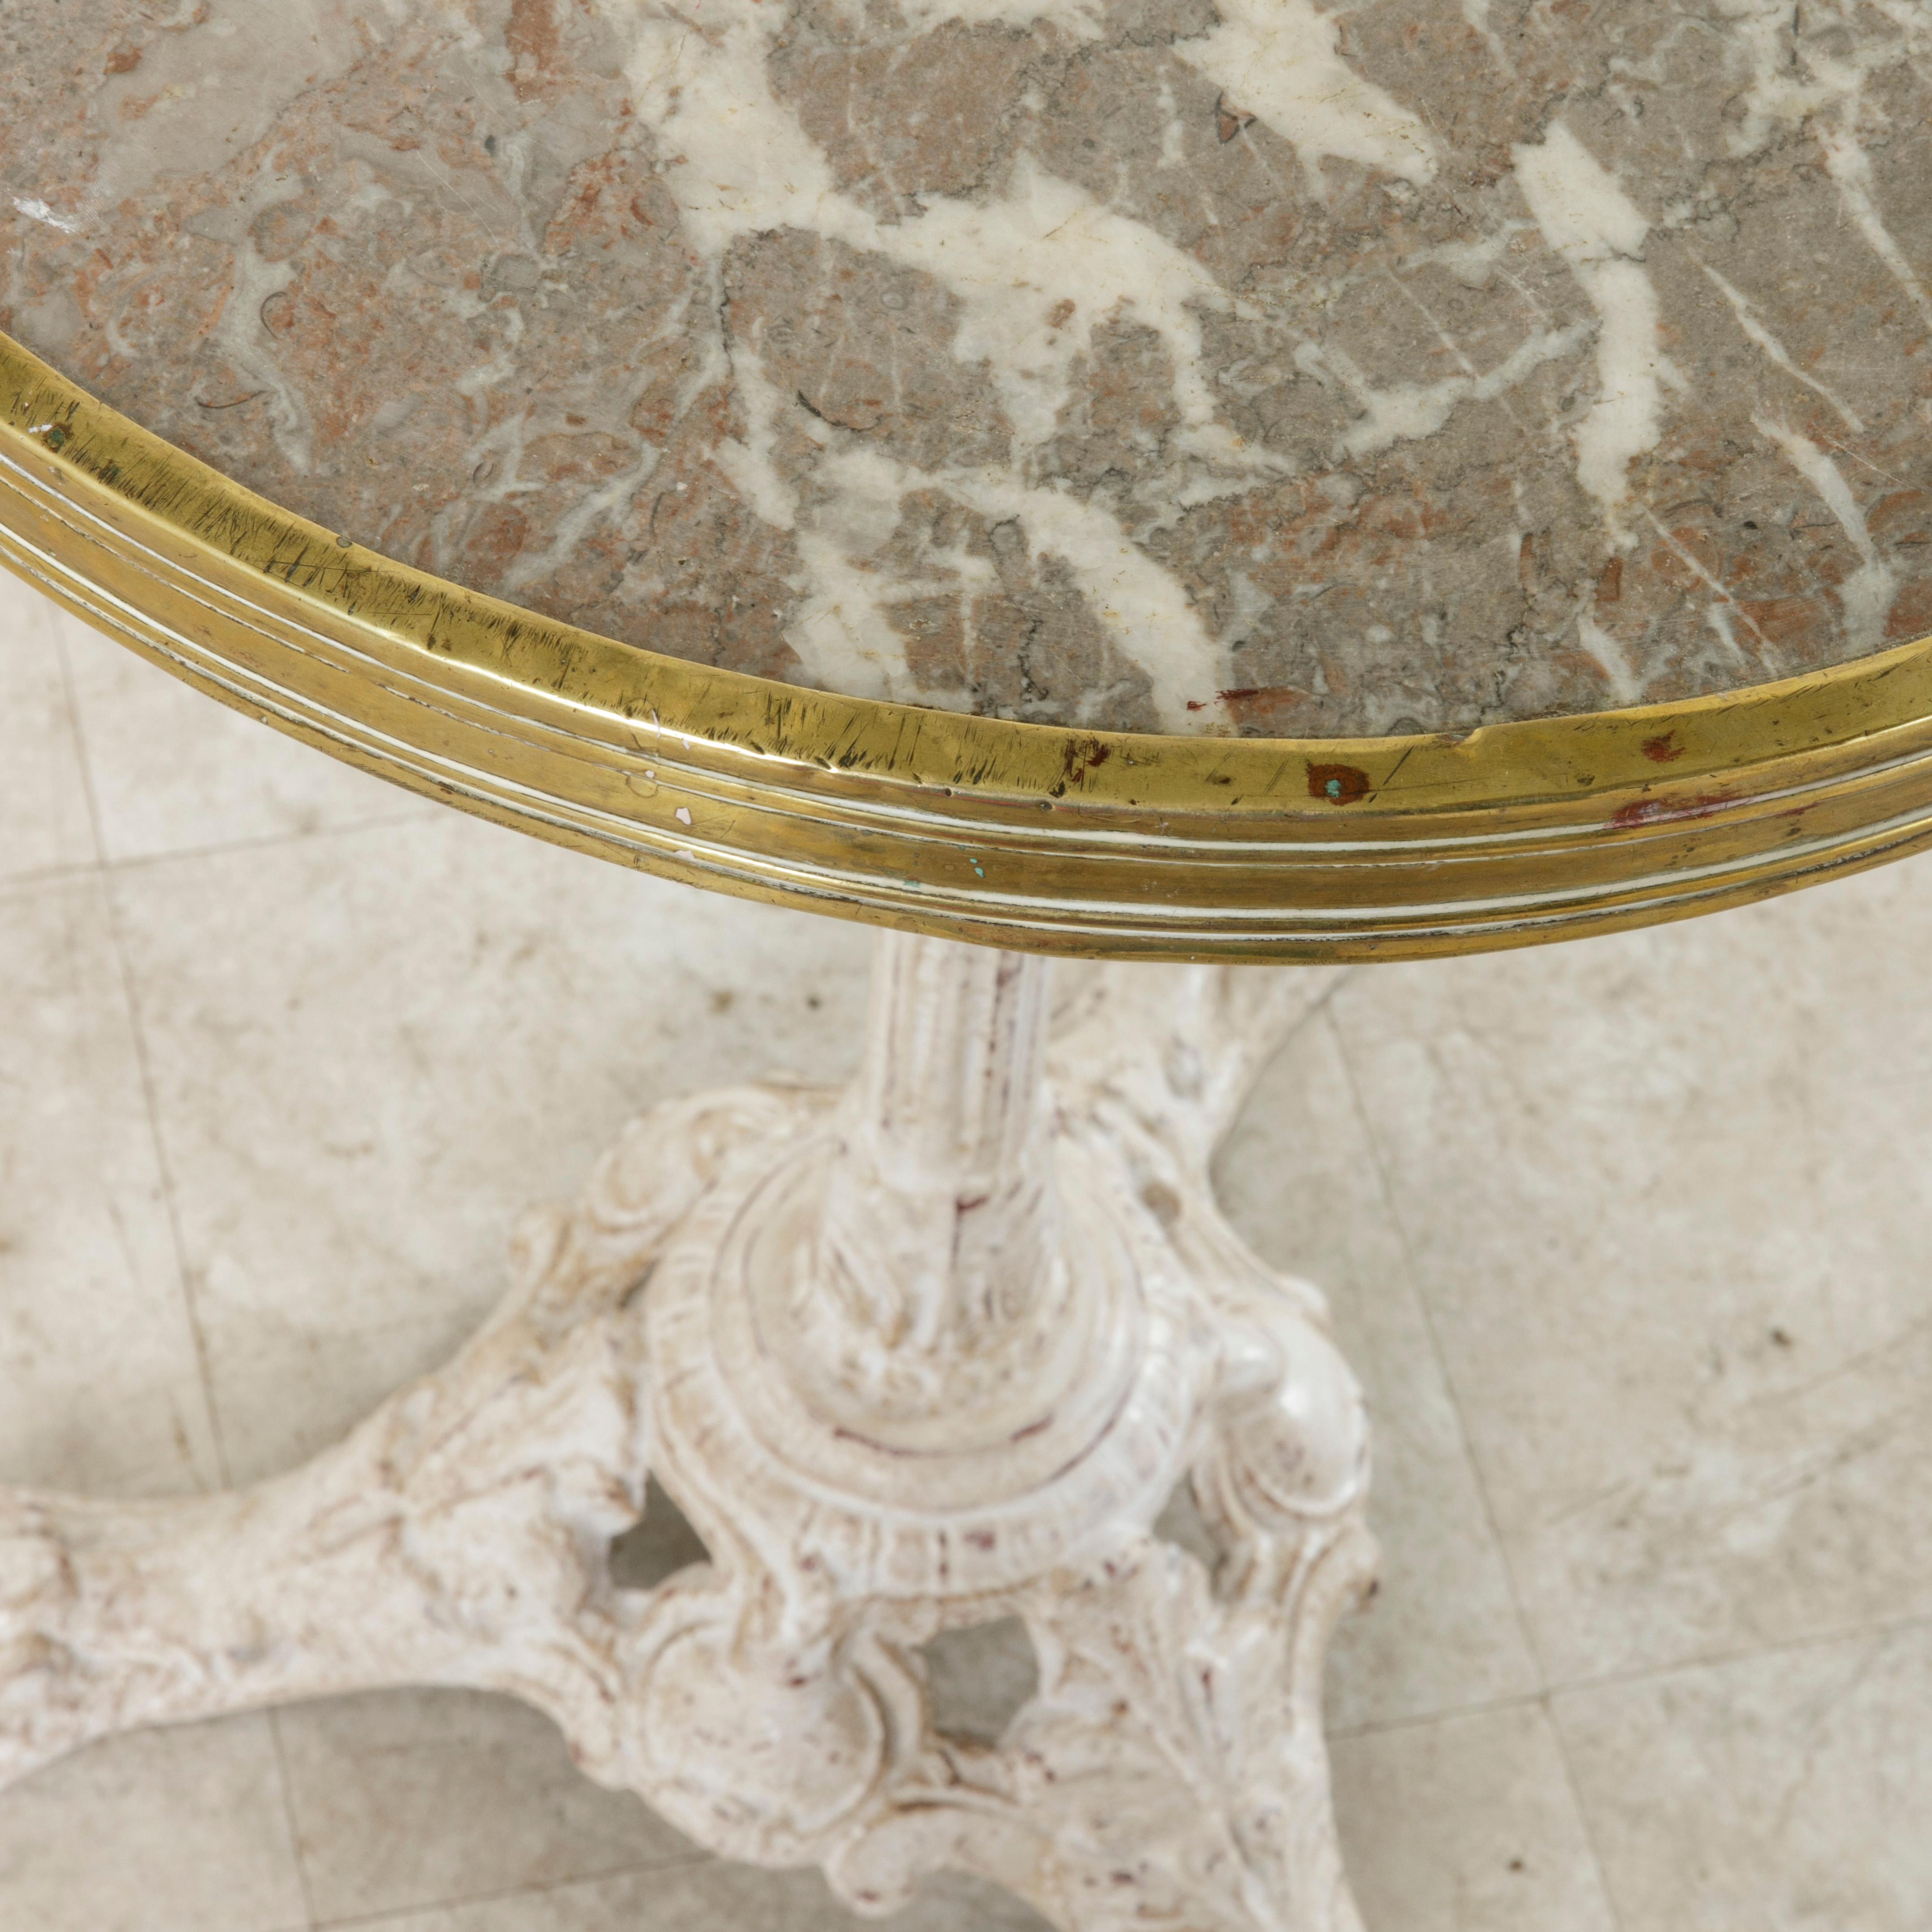 Early 20th Century French Cast Iron Bistro Table with Marble Top and Brass Rim, circa 1900